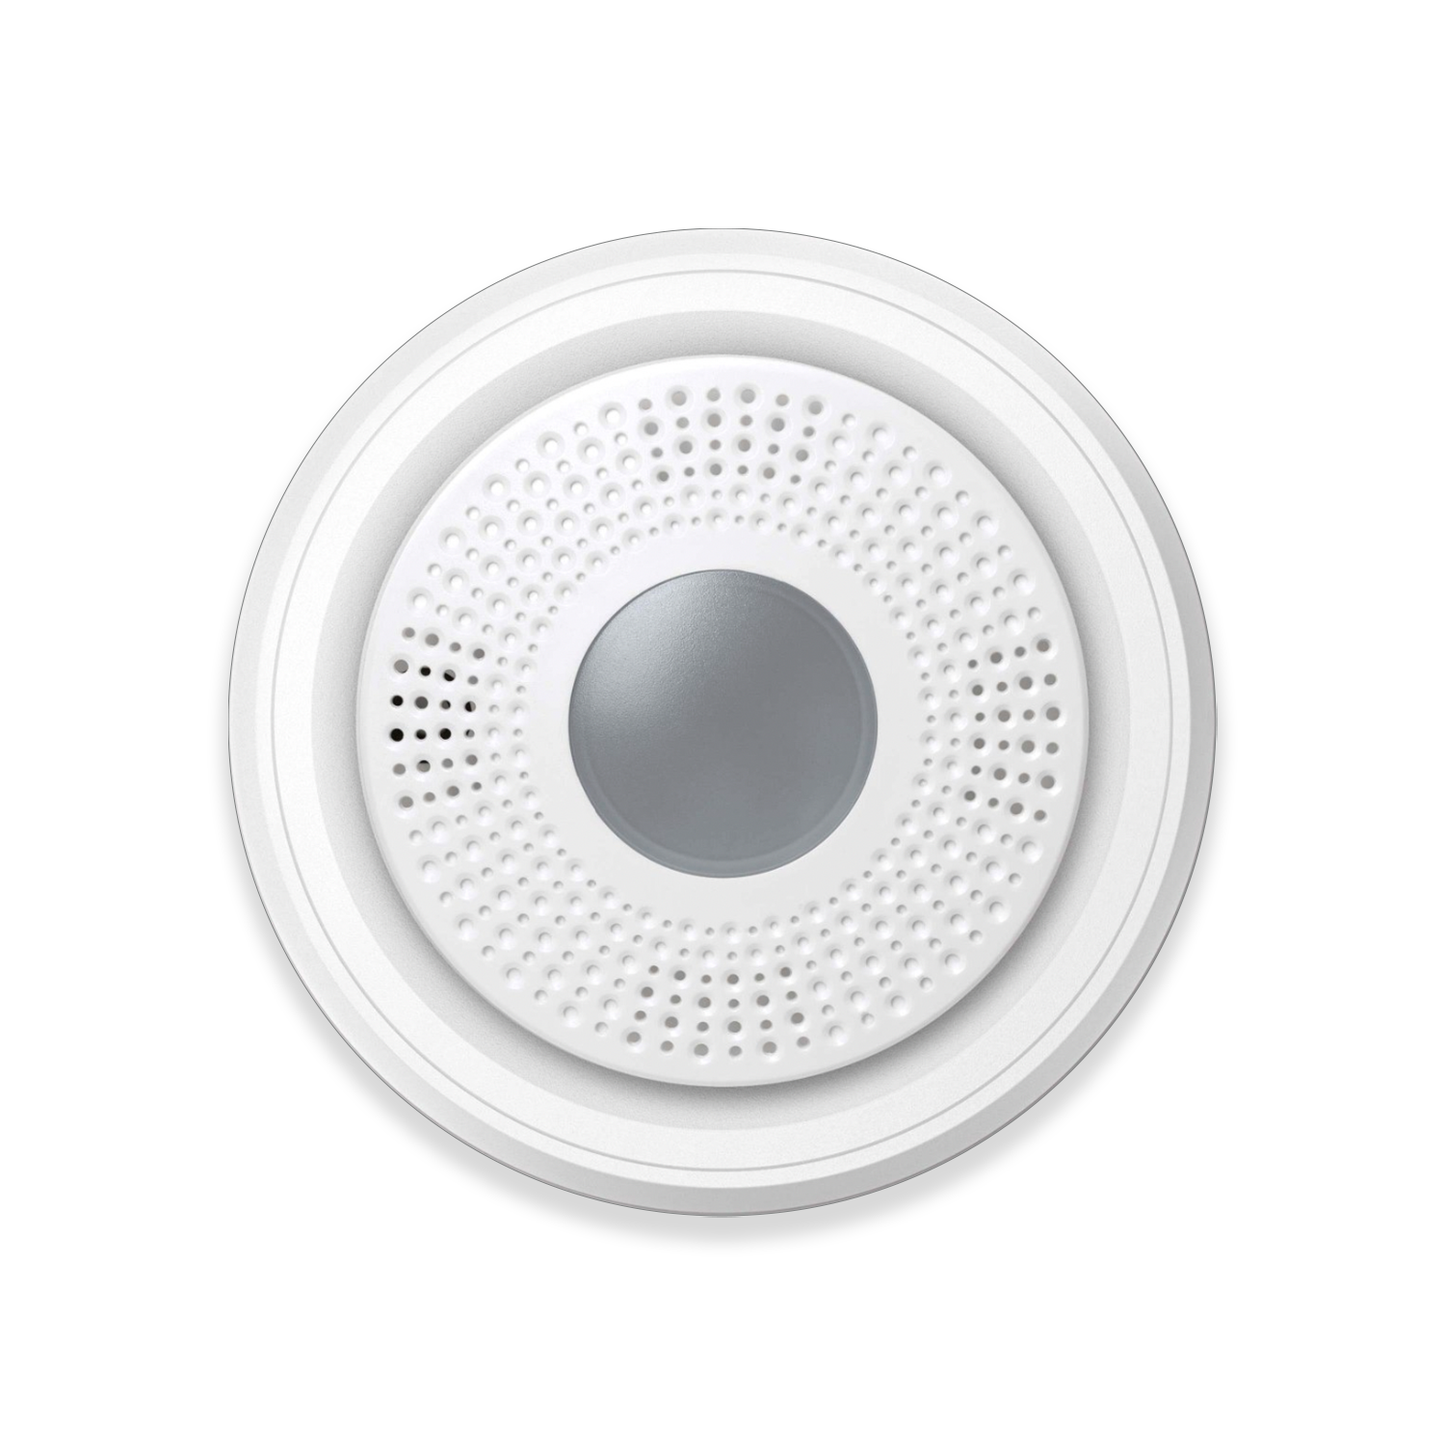 Designed for home security systems that support Two-Way Wireless Technology, this siren delivers big benefits to you and your customers: easy professional installation, remote monitoring/diagnostics, 128-bit AES encryption and tamper protection.